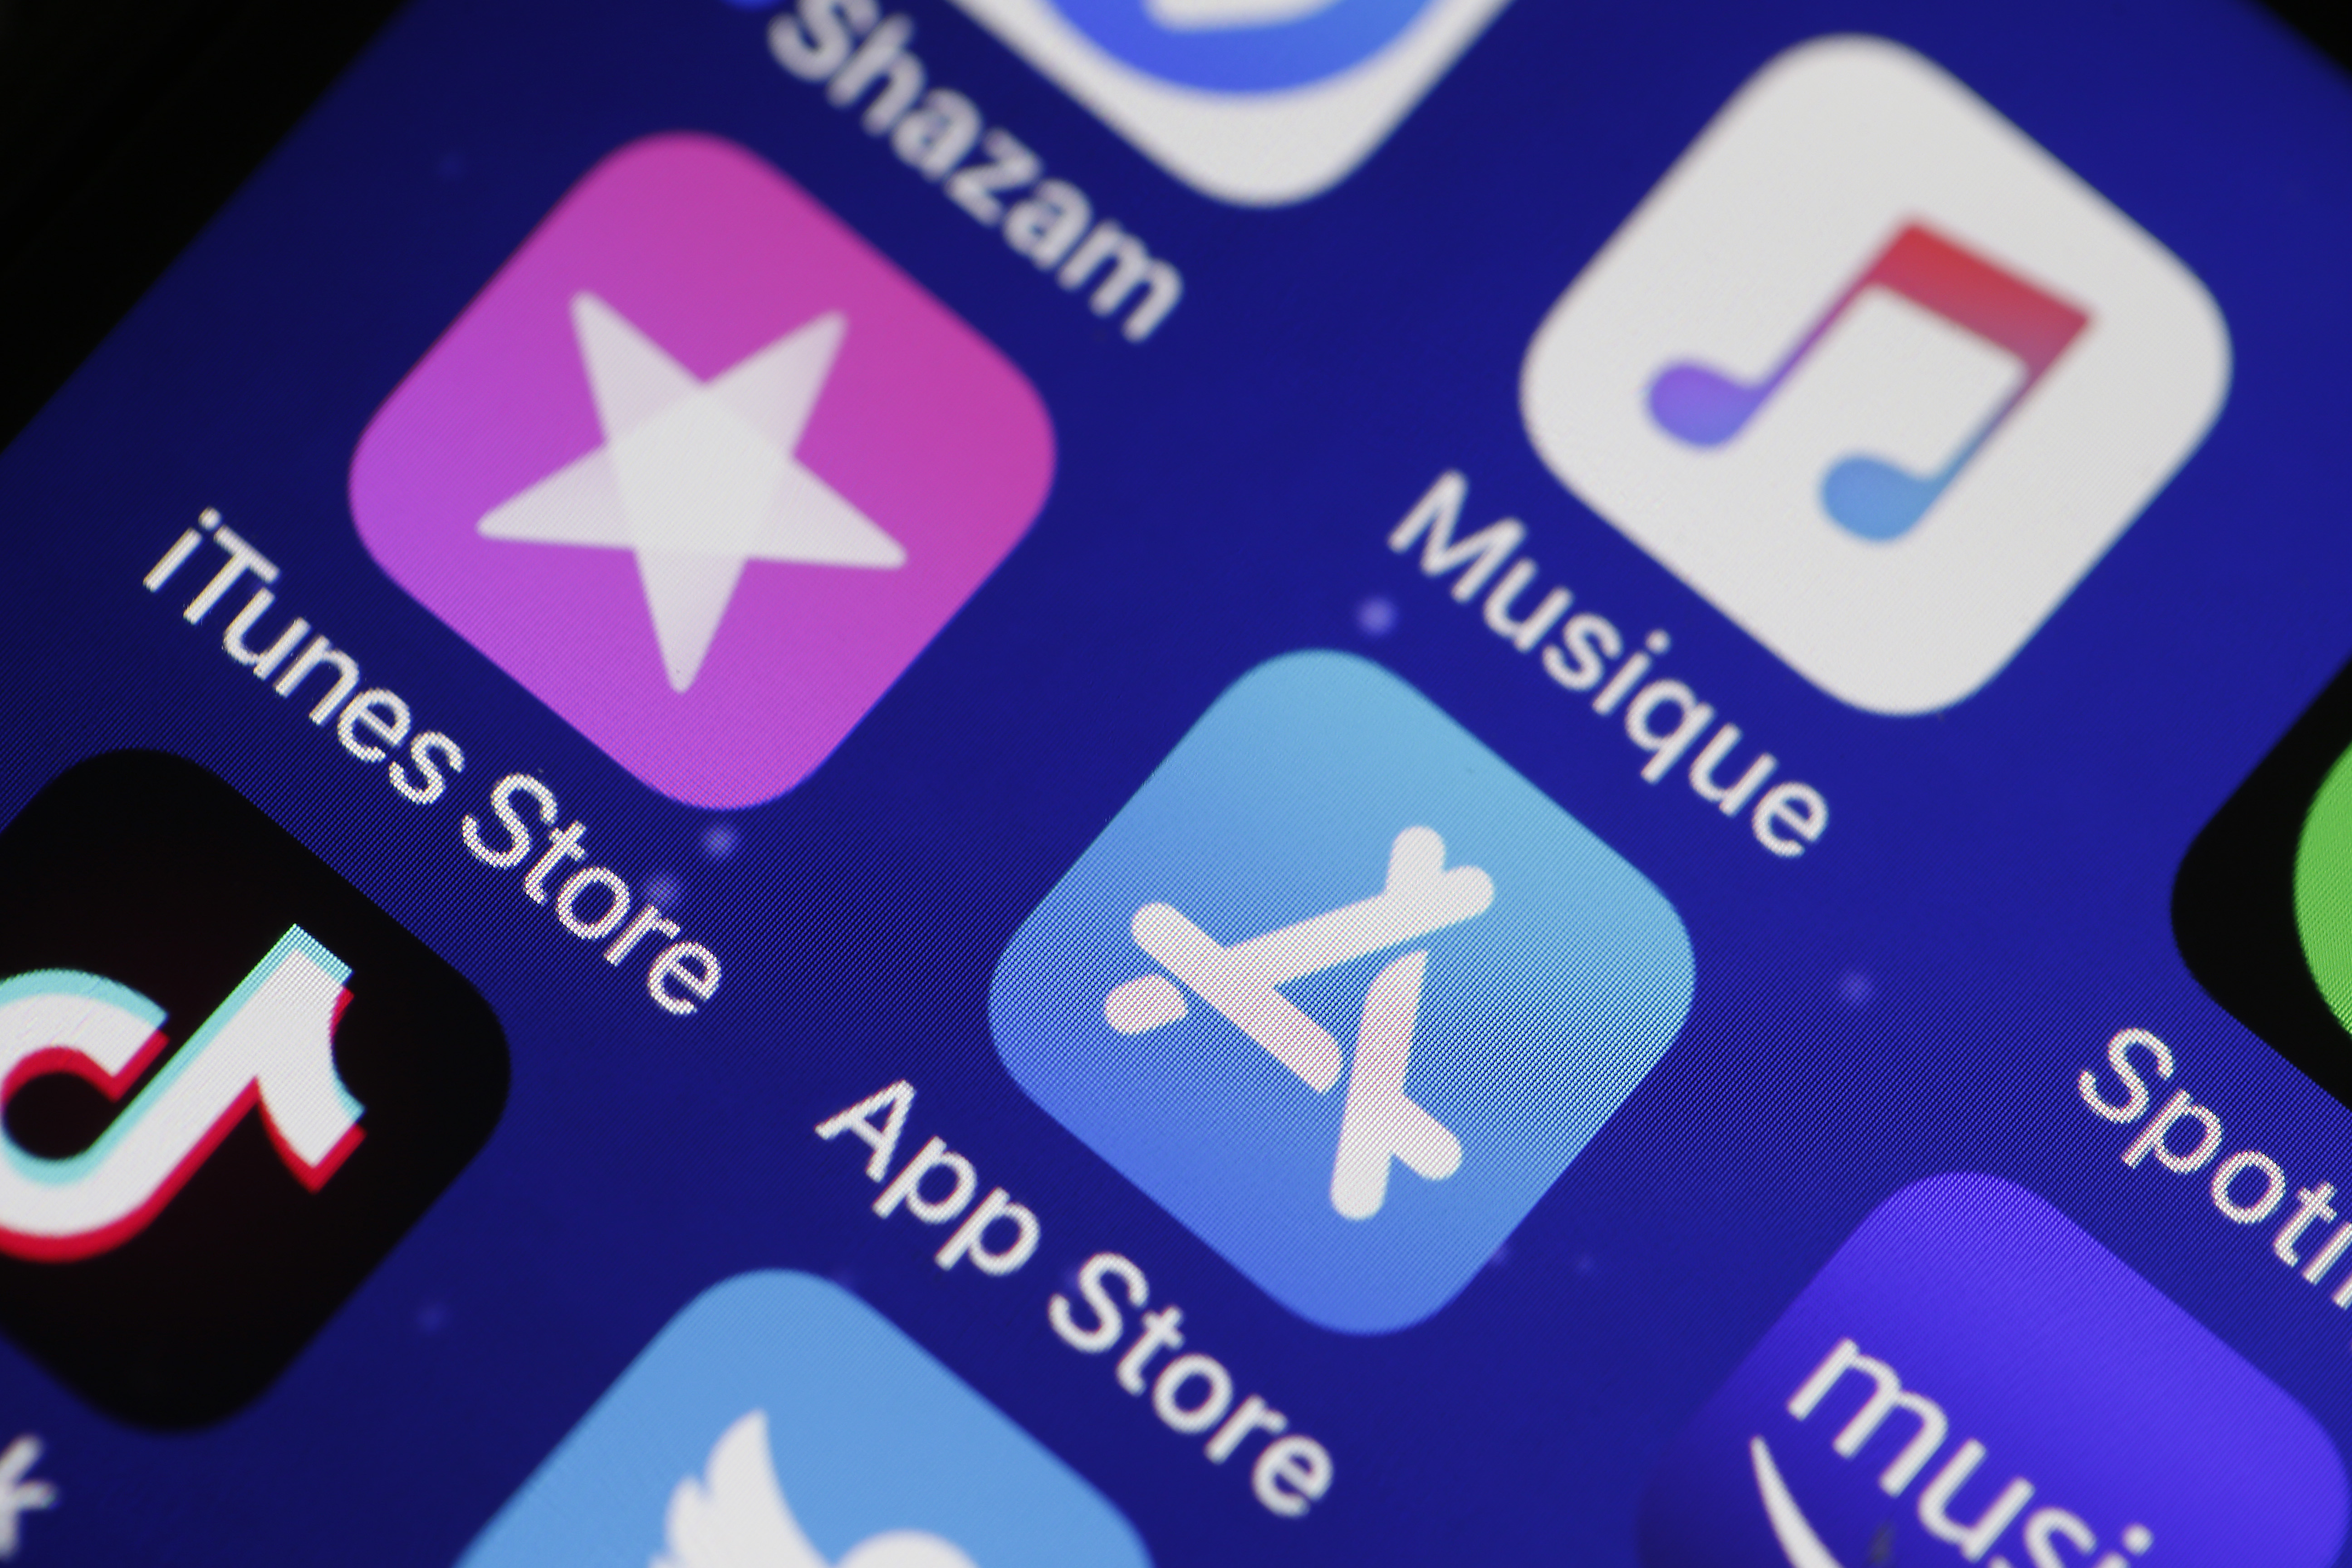 , This Week in Apps: Chinese giants take on Google Play, Iowa caucus disaster, TikTok’s power over App Store charts, #Bizwhiznetwork.com Innovation ΛＩ